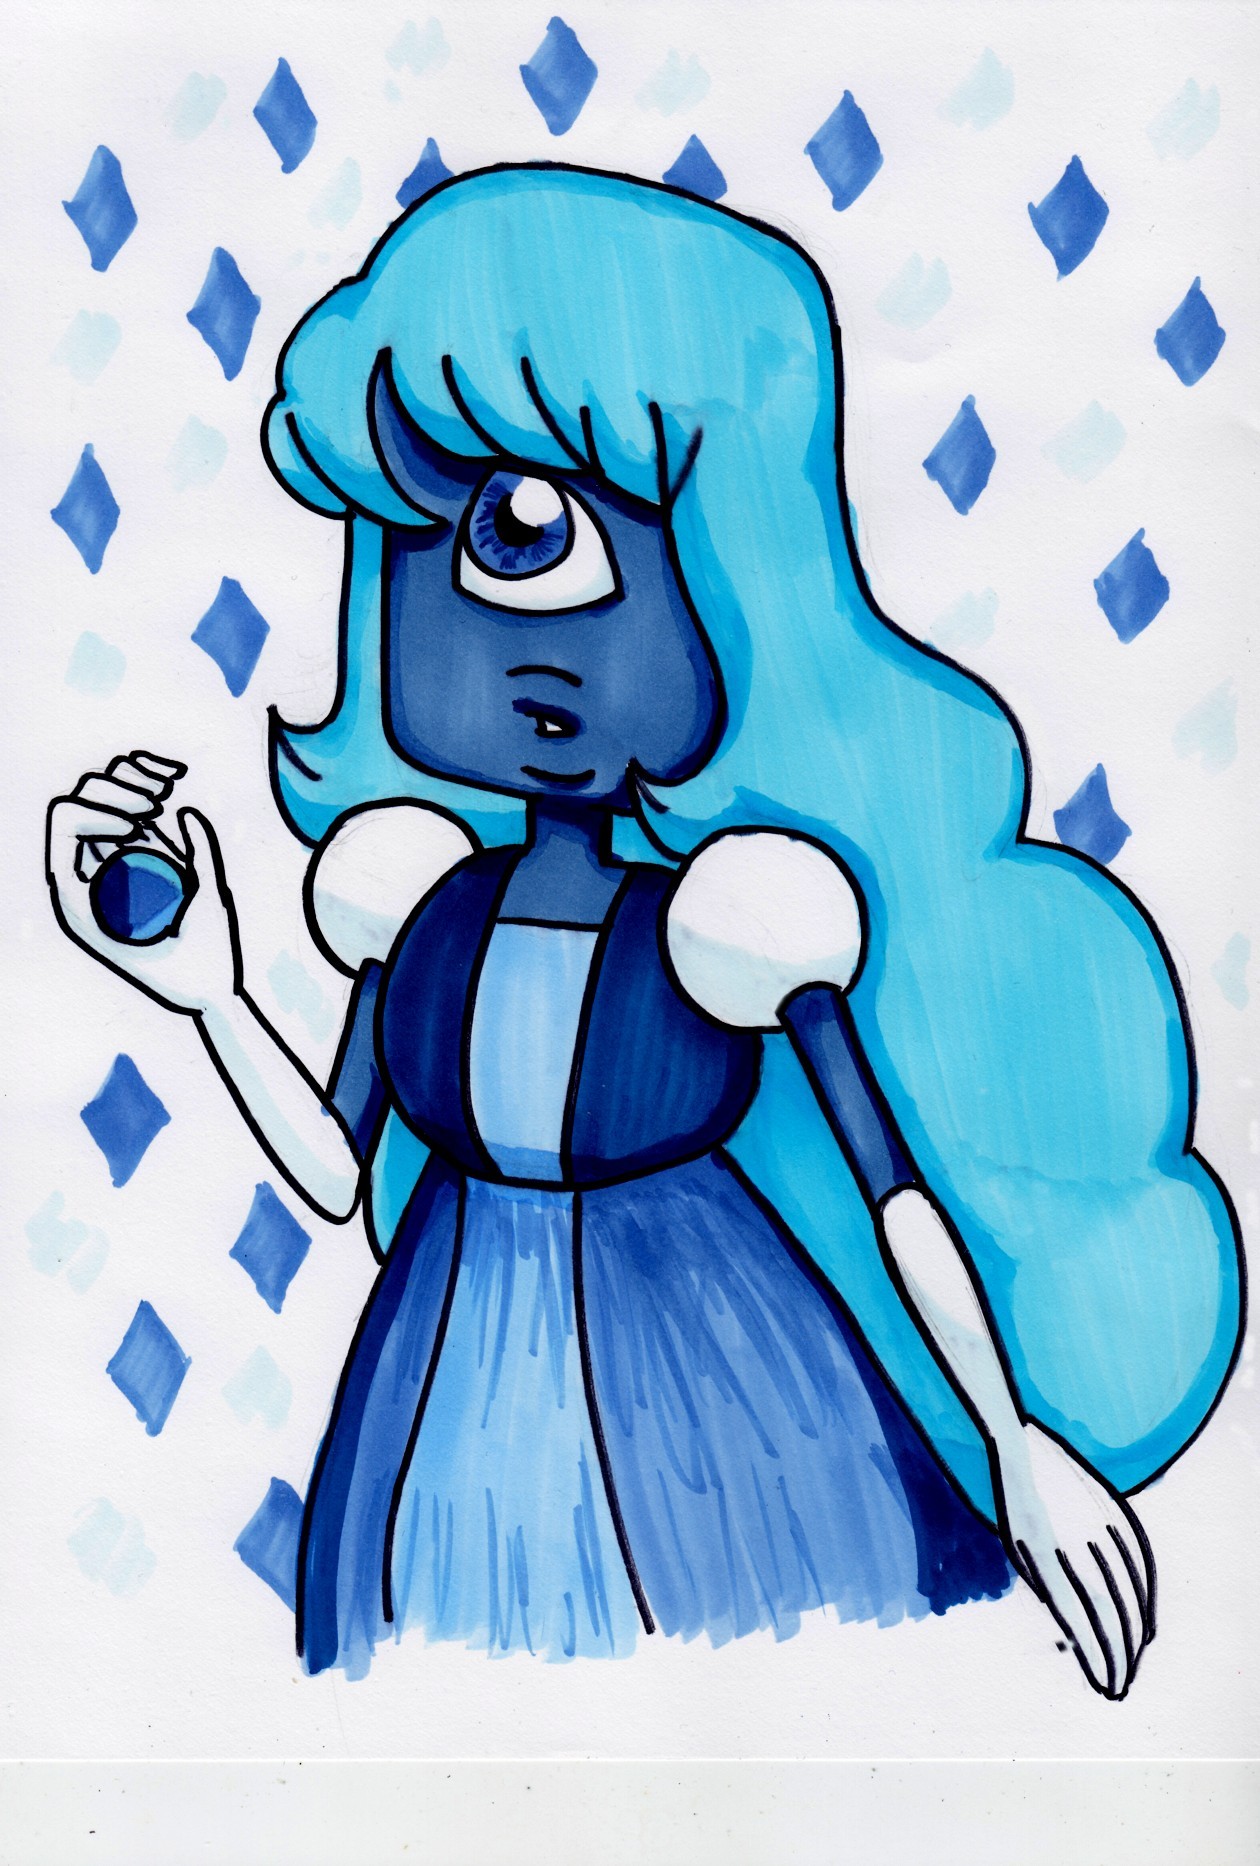 Sapphire …For follower milestones I like to attempt art that is, in some way, a subject I’ve never tried before. I realized I’ve never drawn Sapphire when you can see her eye. I never tried partly...